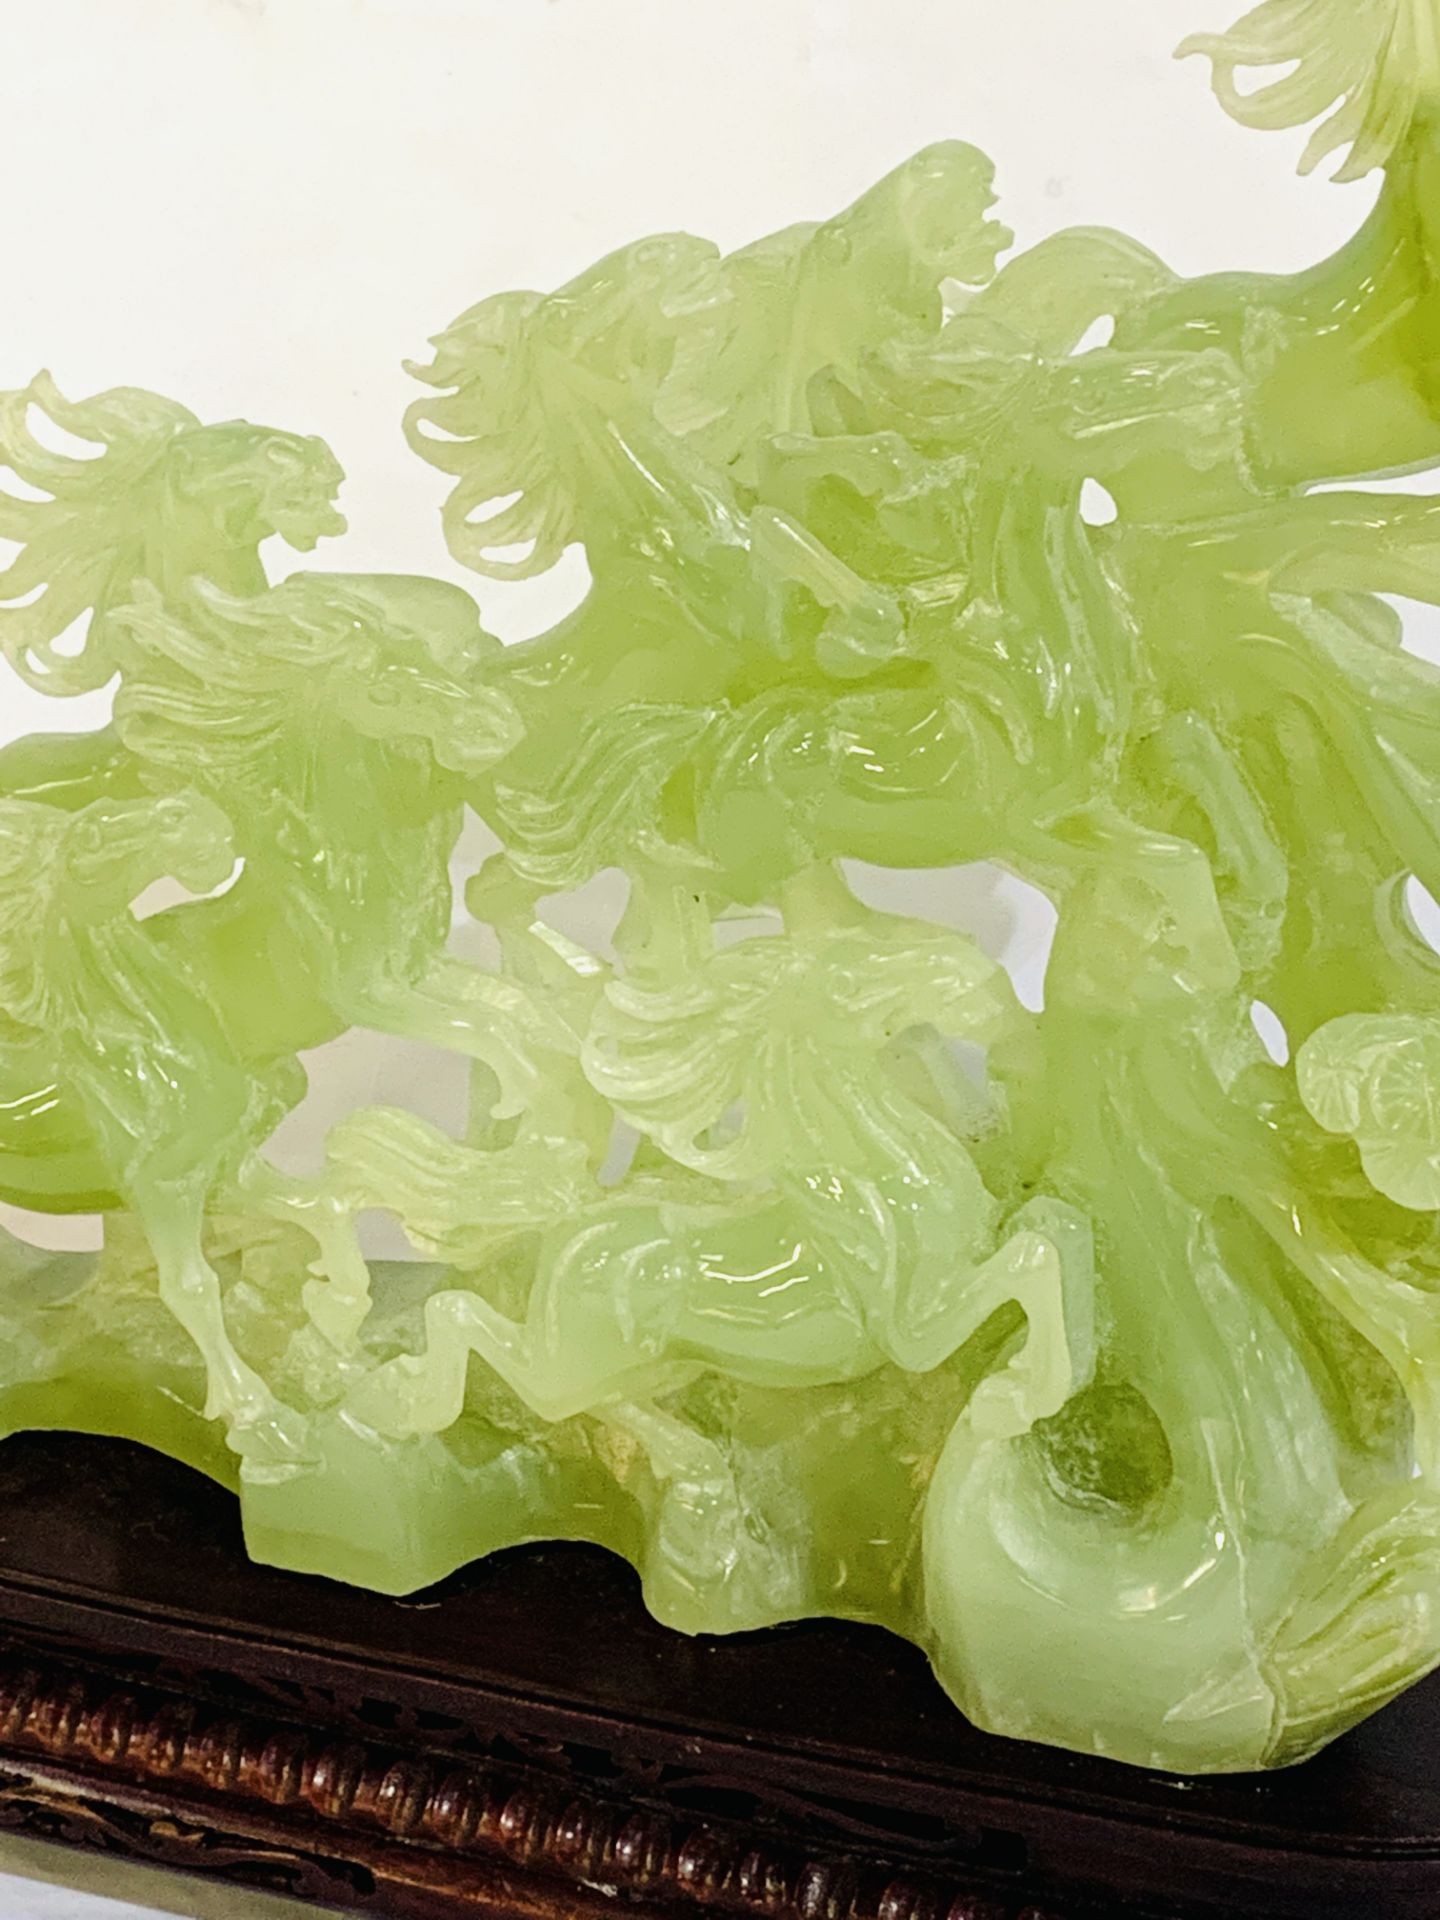 Jade carving of the eight horses of the Emperor Mu Wang - Image 6 of 11